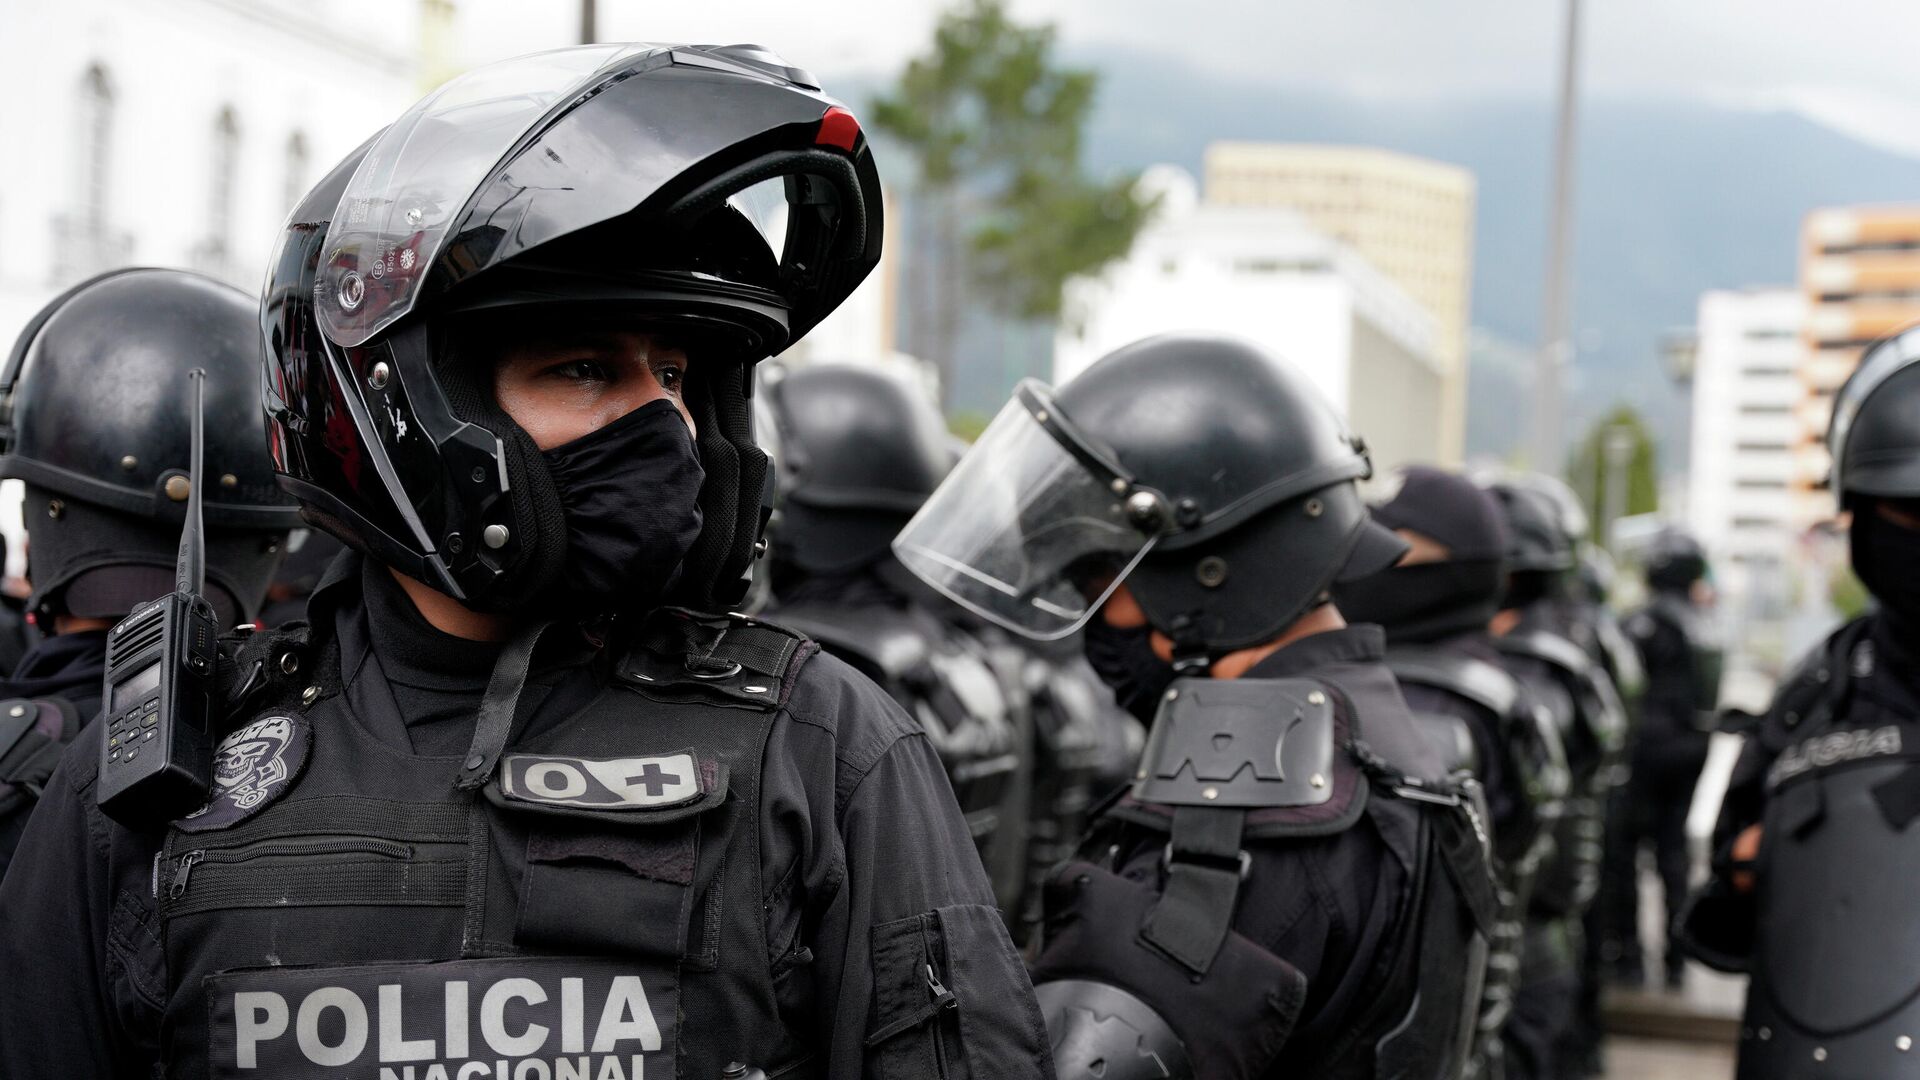 A Police officer stands guard during Ecuadorean unions members' march against labor reforms proposed by president Guillermo Lasso in Quito, Ecuador October 20, 2021. - Sputnik International, 1920, 30.10.2021